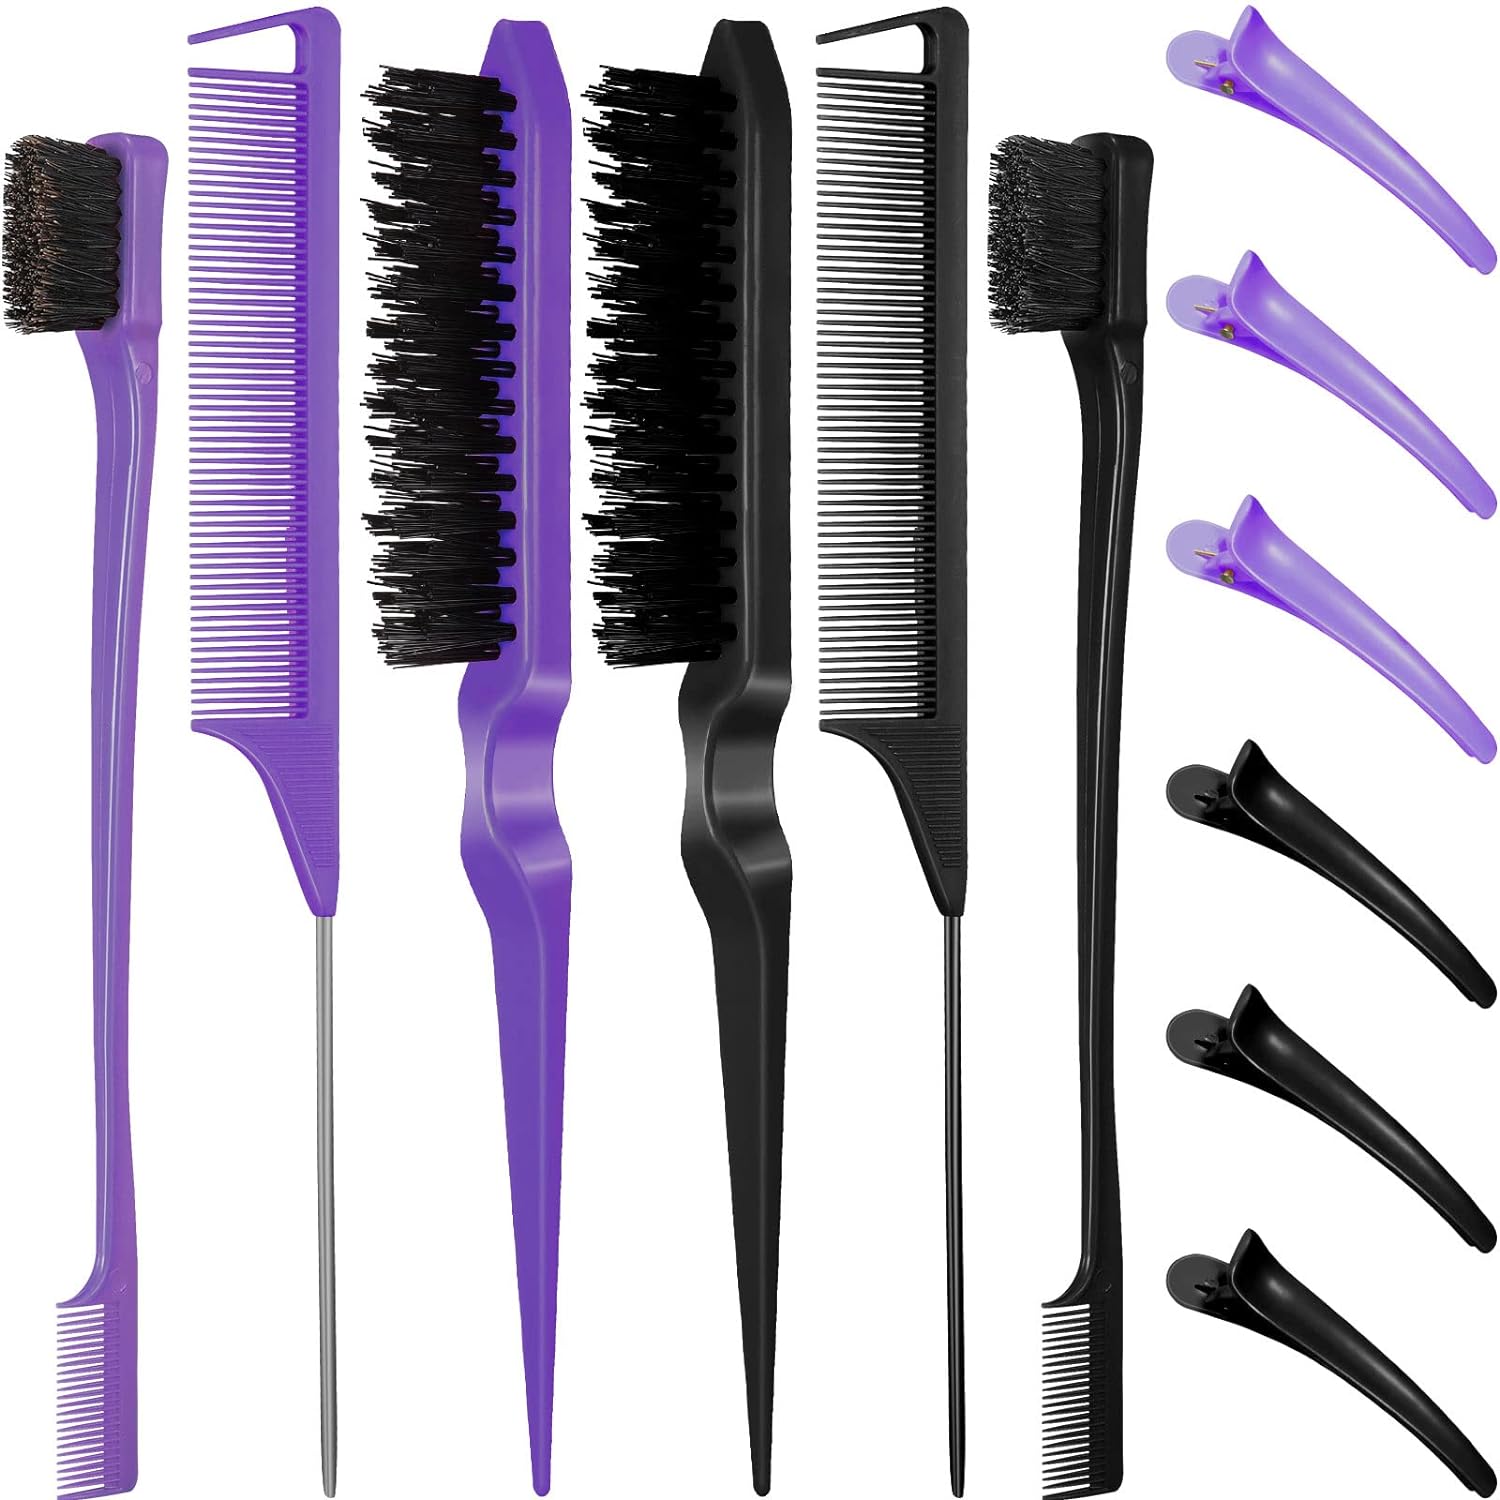 12 Pieces Hair Brush Set, Nylon Teasing Hair Brushes 3 Row Salon Teasing Brush, Double Sided Hair Edge Brush Smooth Comb Grooming, Rat Tail Combs with Duckbill Clips for Women Girls (Black)